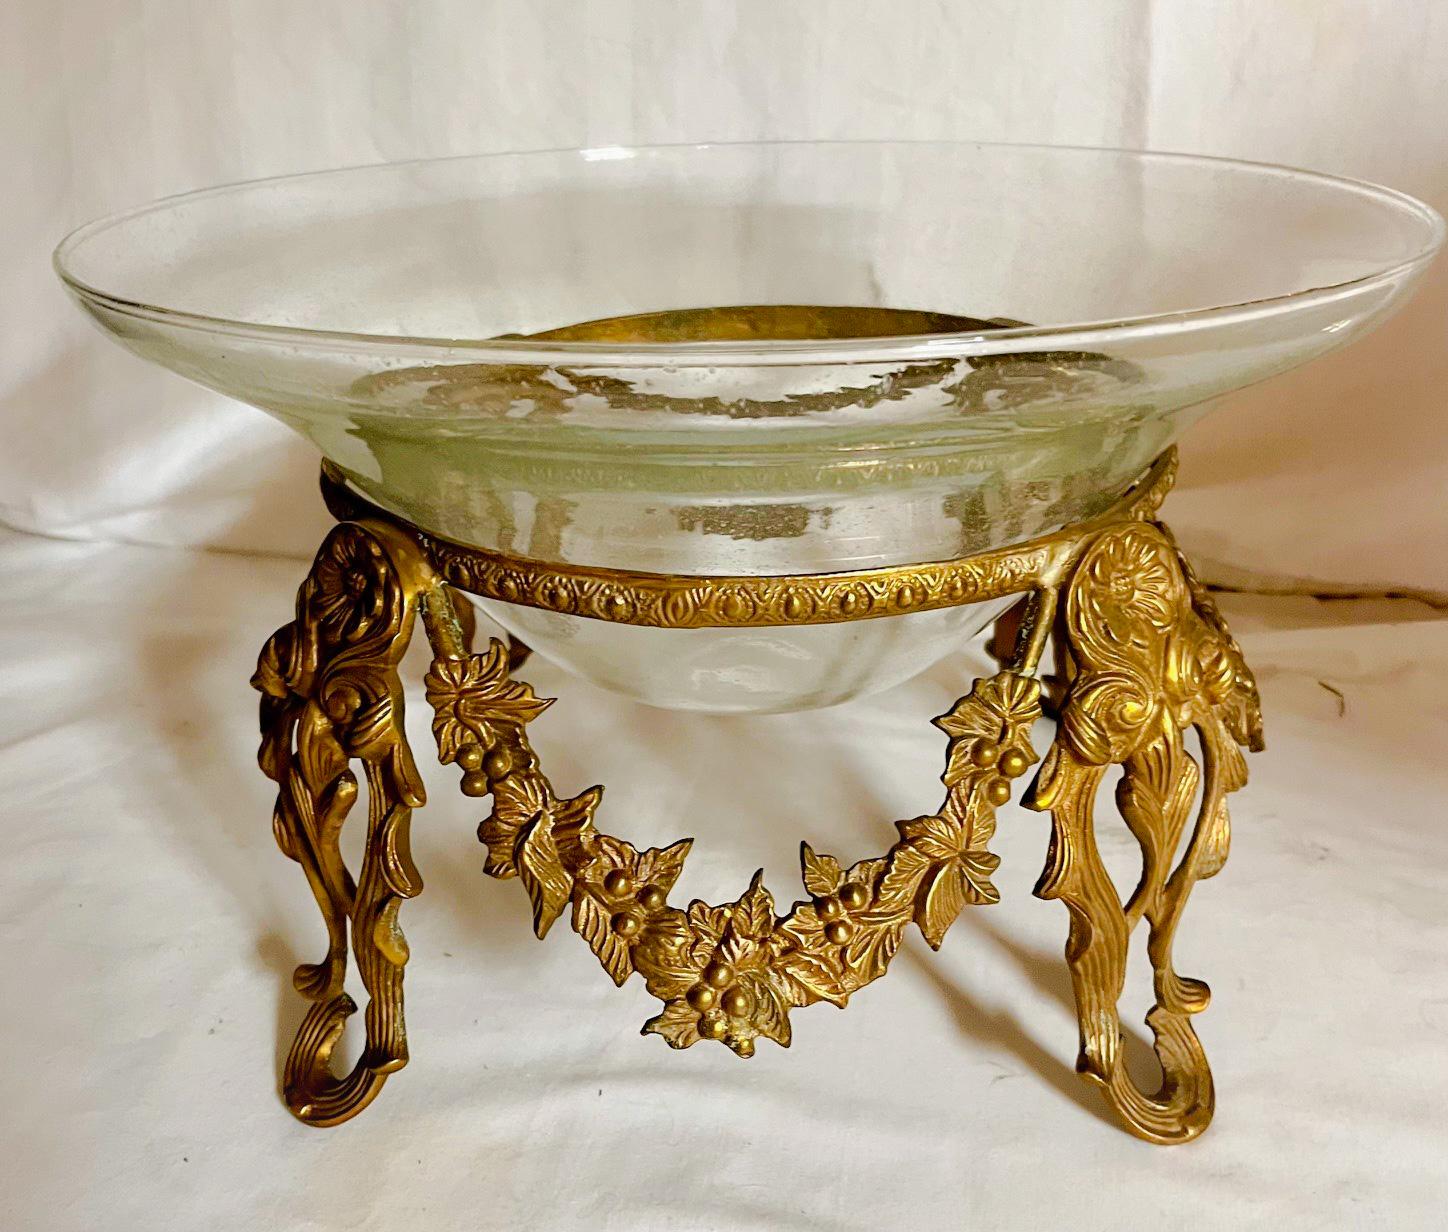 Vintage Large Art Glass Bowl Tazza Centerpiece Bowl in Brass Stand

Clear classical hand blown glass bowl fitting in an exquisite brass base. It is most likely dating from the Mid-Century. The stand is beautifully crafted with elegant floral swags